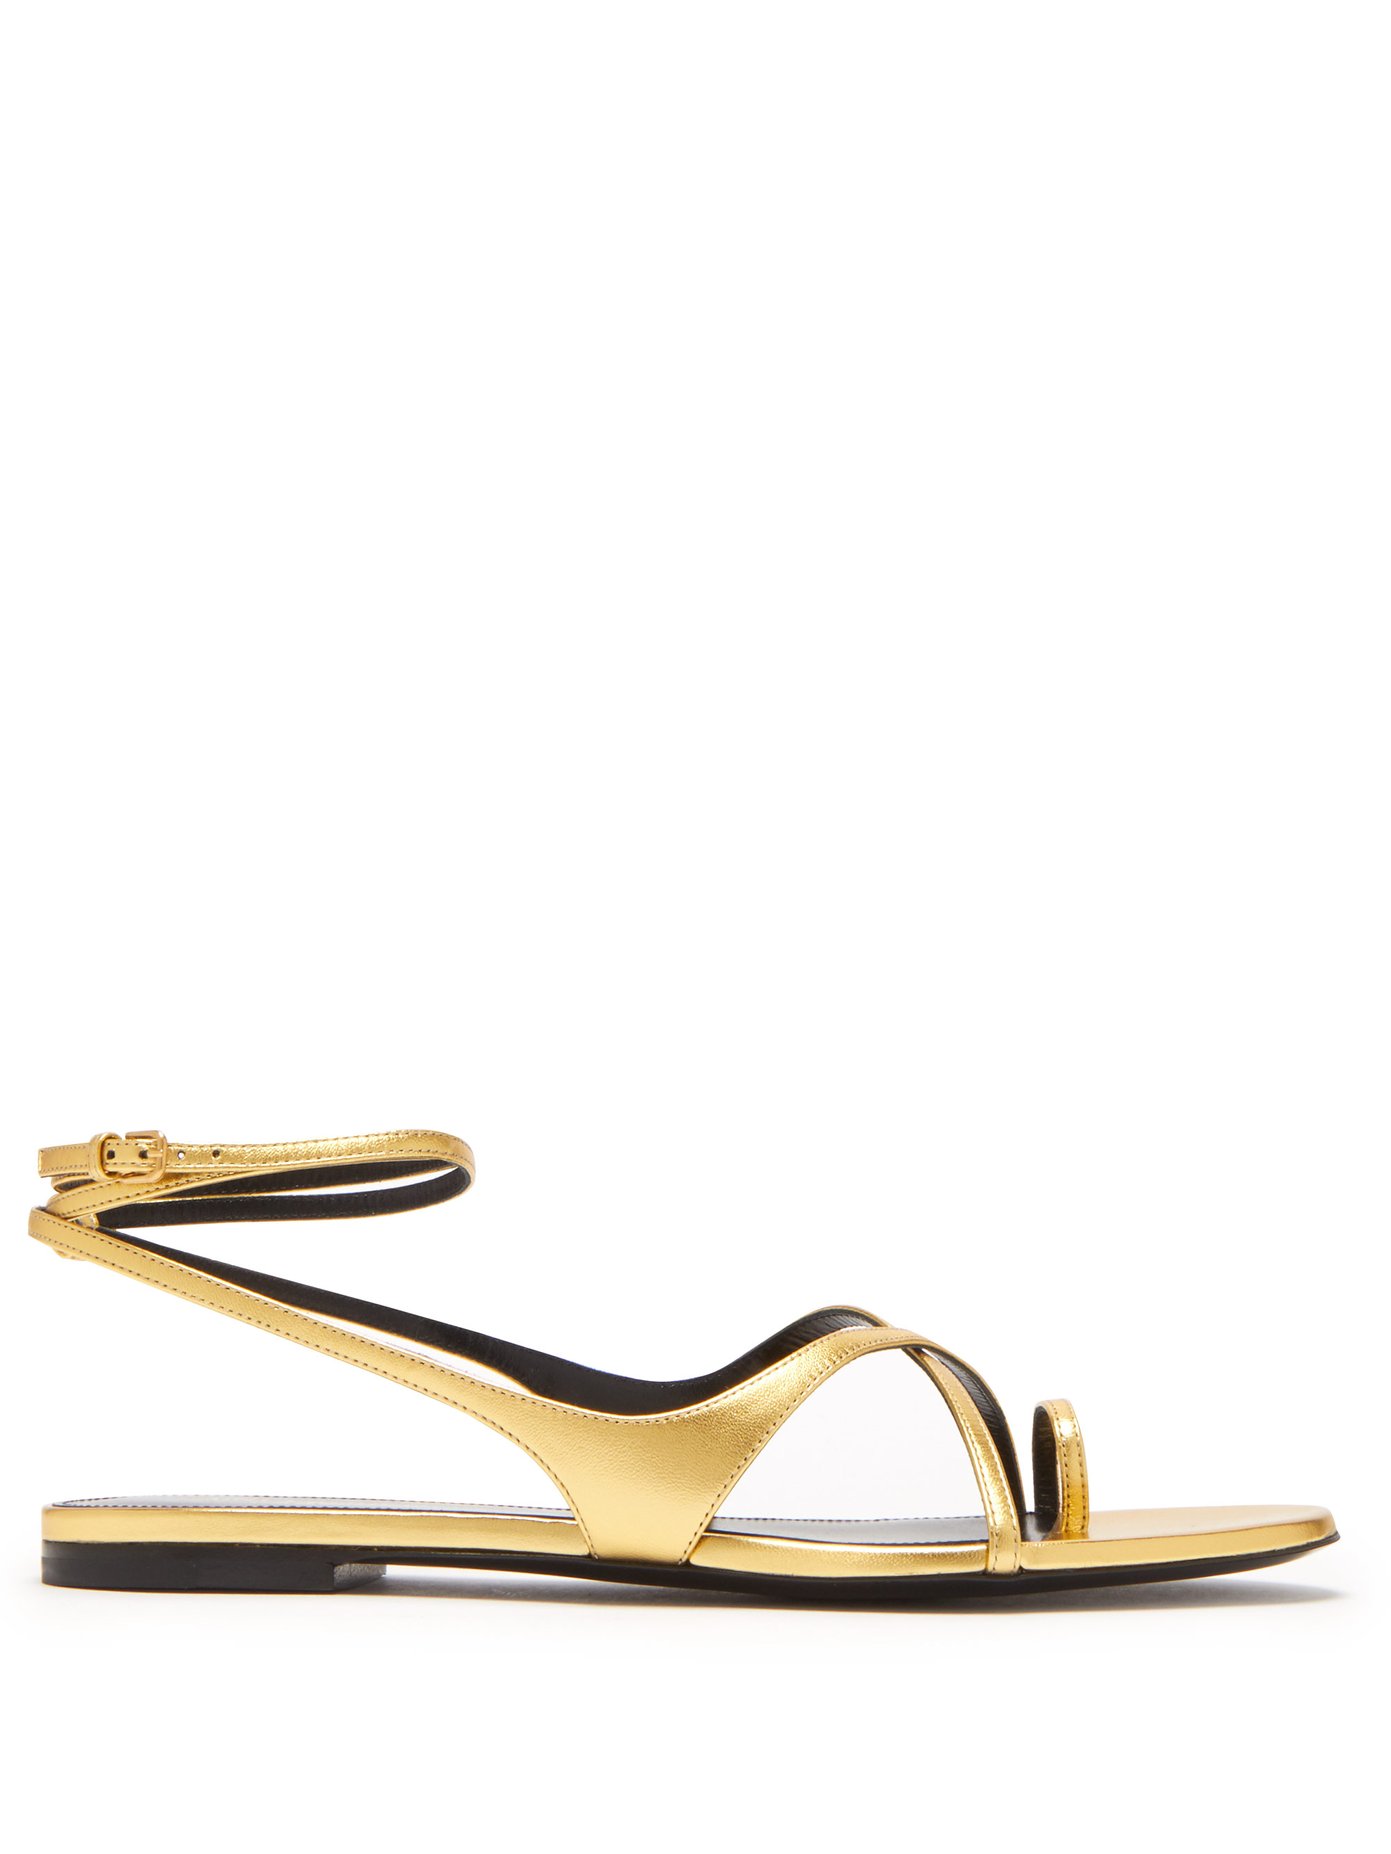 gold leather sandals